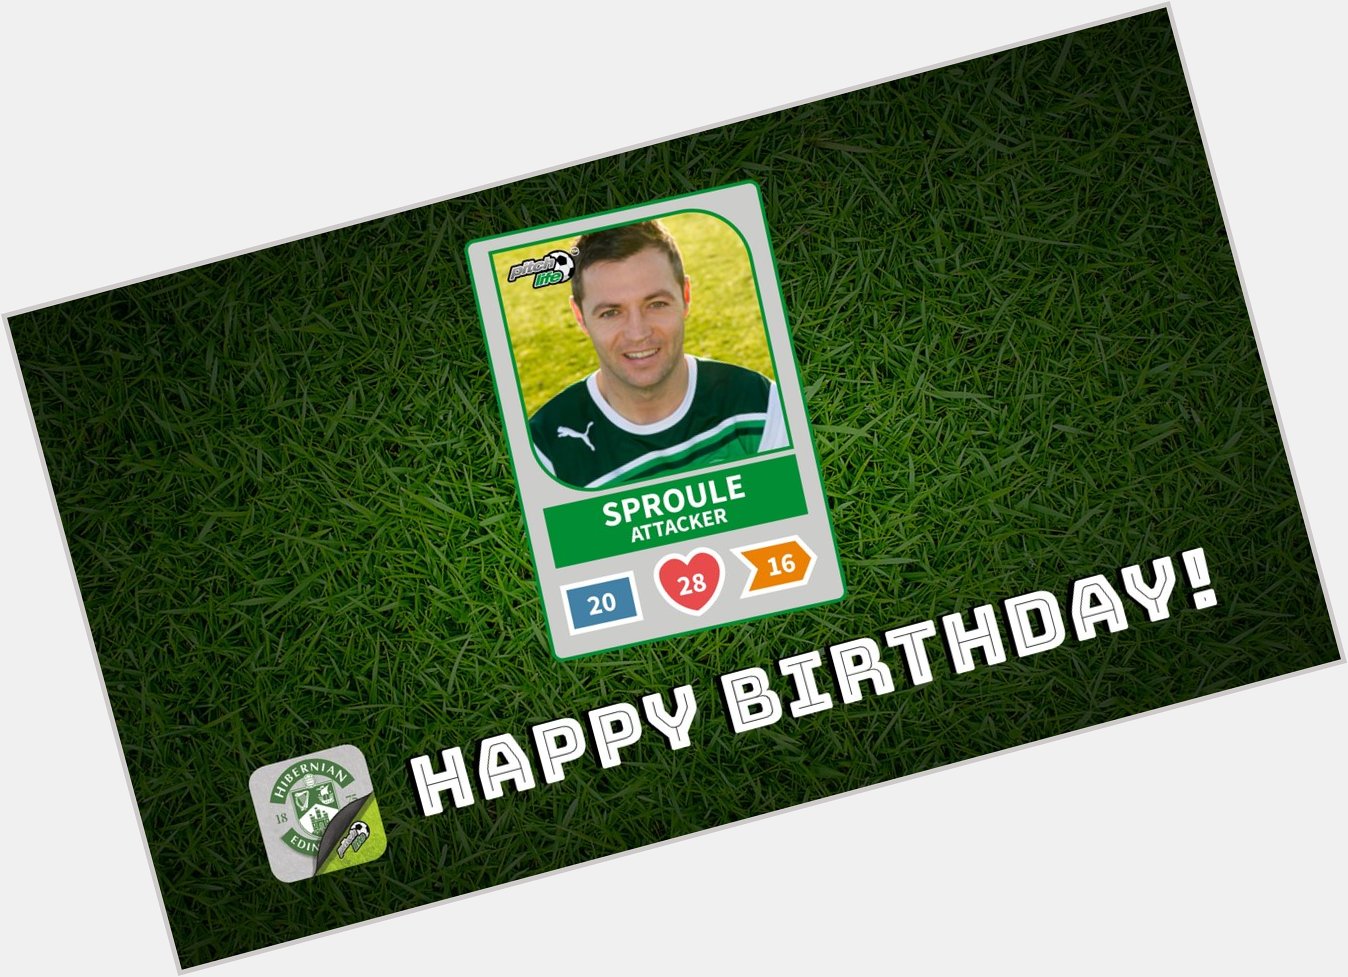 Happy Birthday to Hibs attacker Ivan Sproule!  